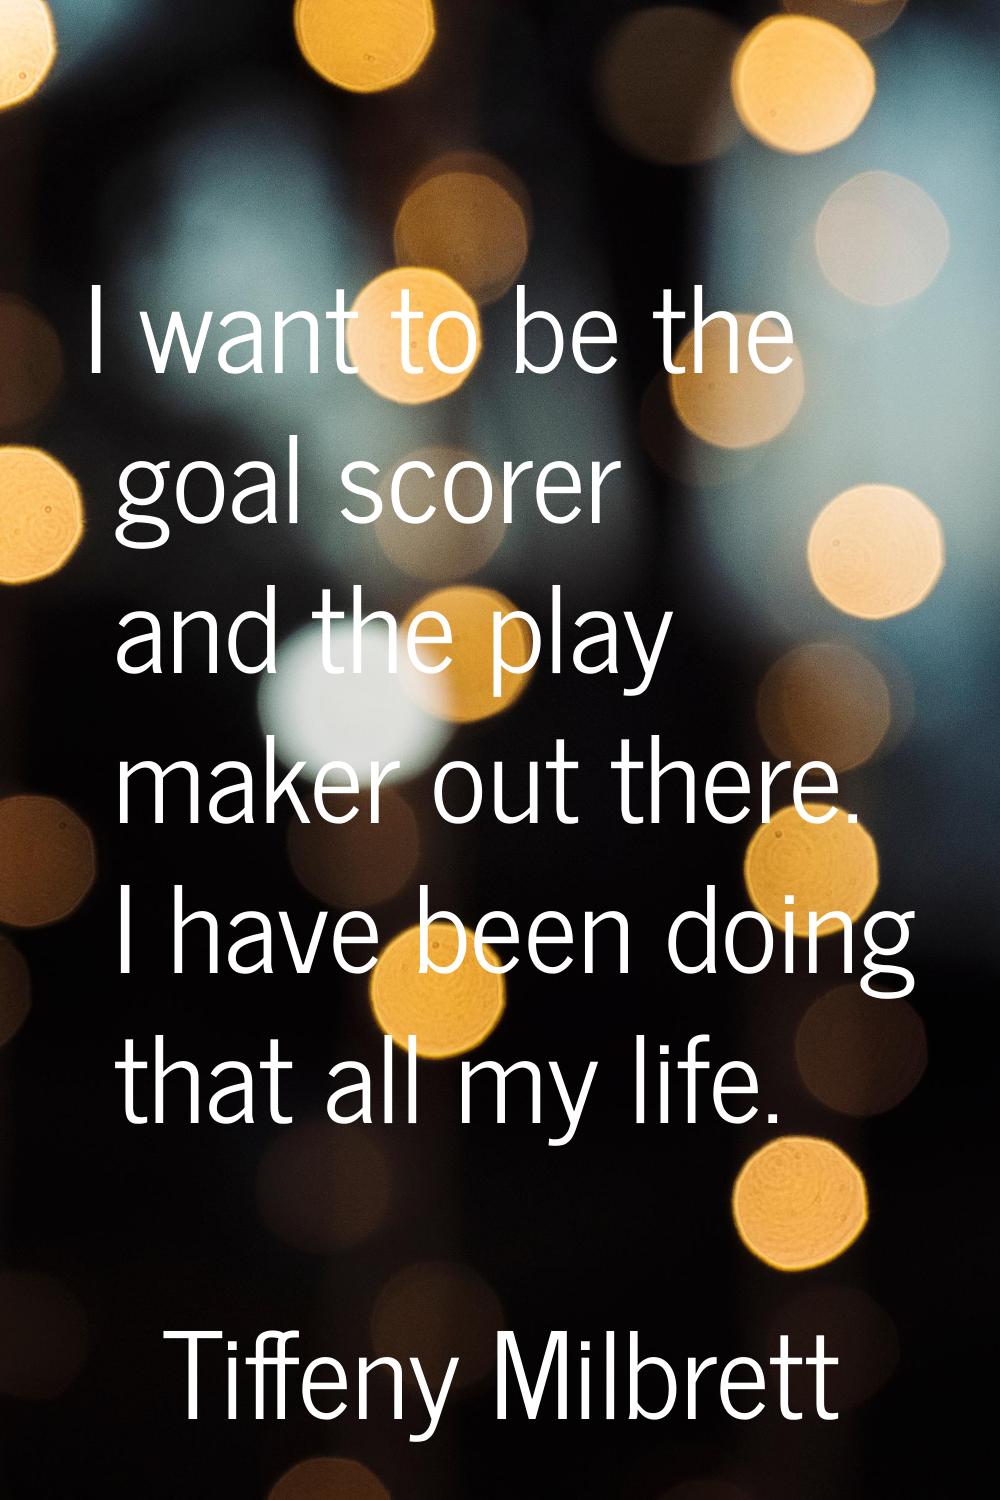 I want to be the goal scorer and the play maker out there. I have been doing that all my life.